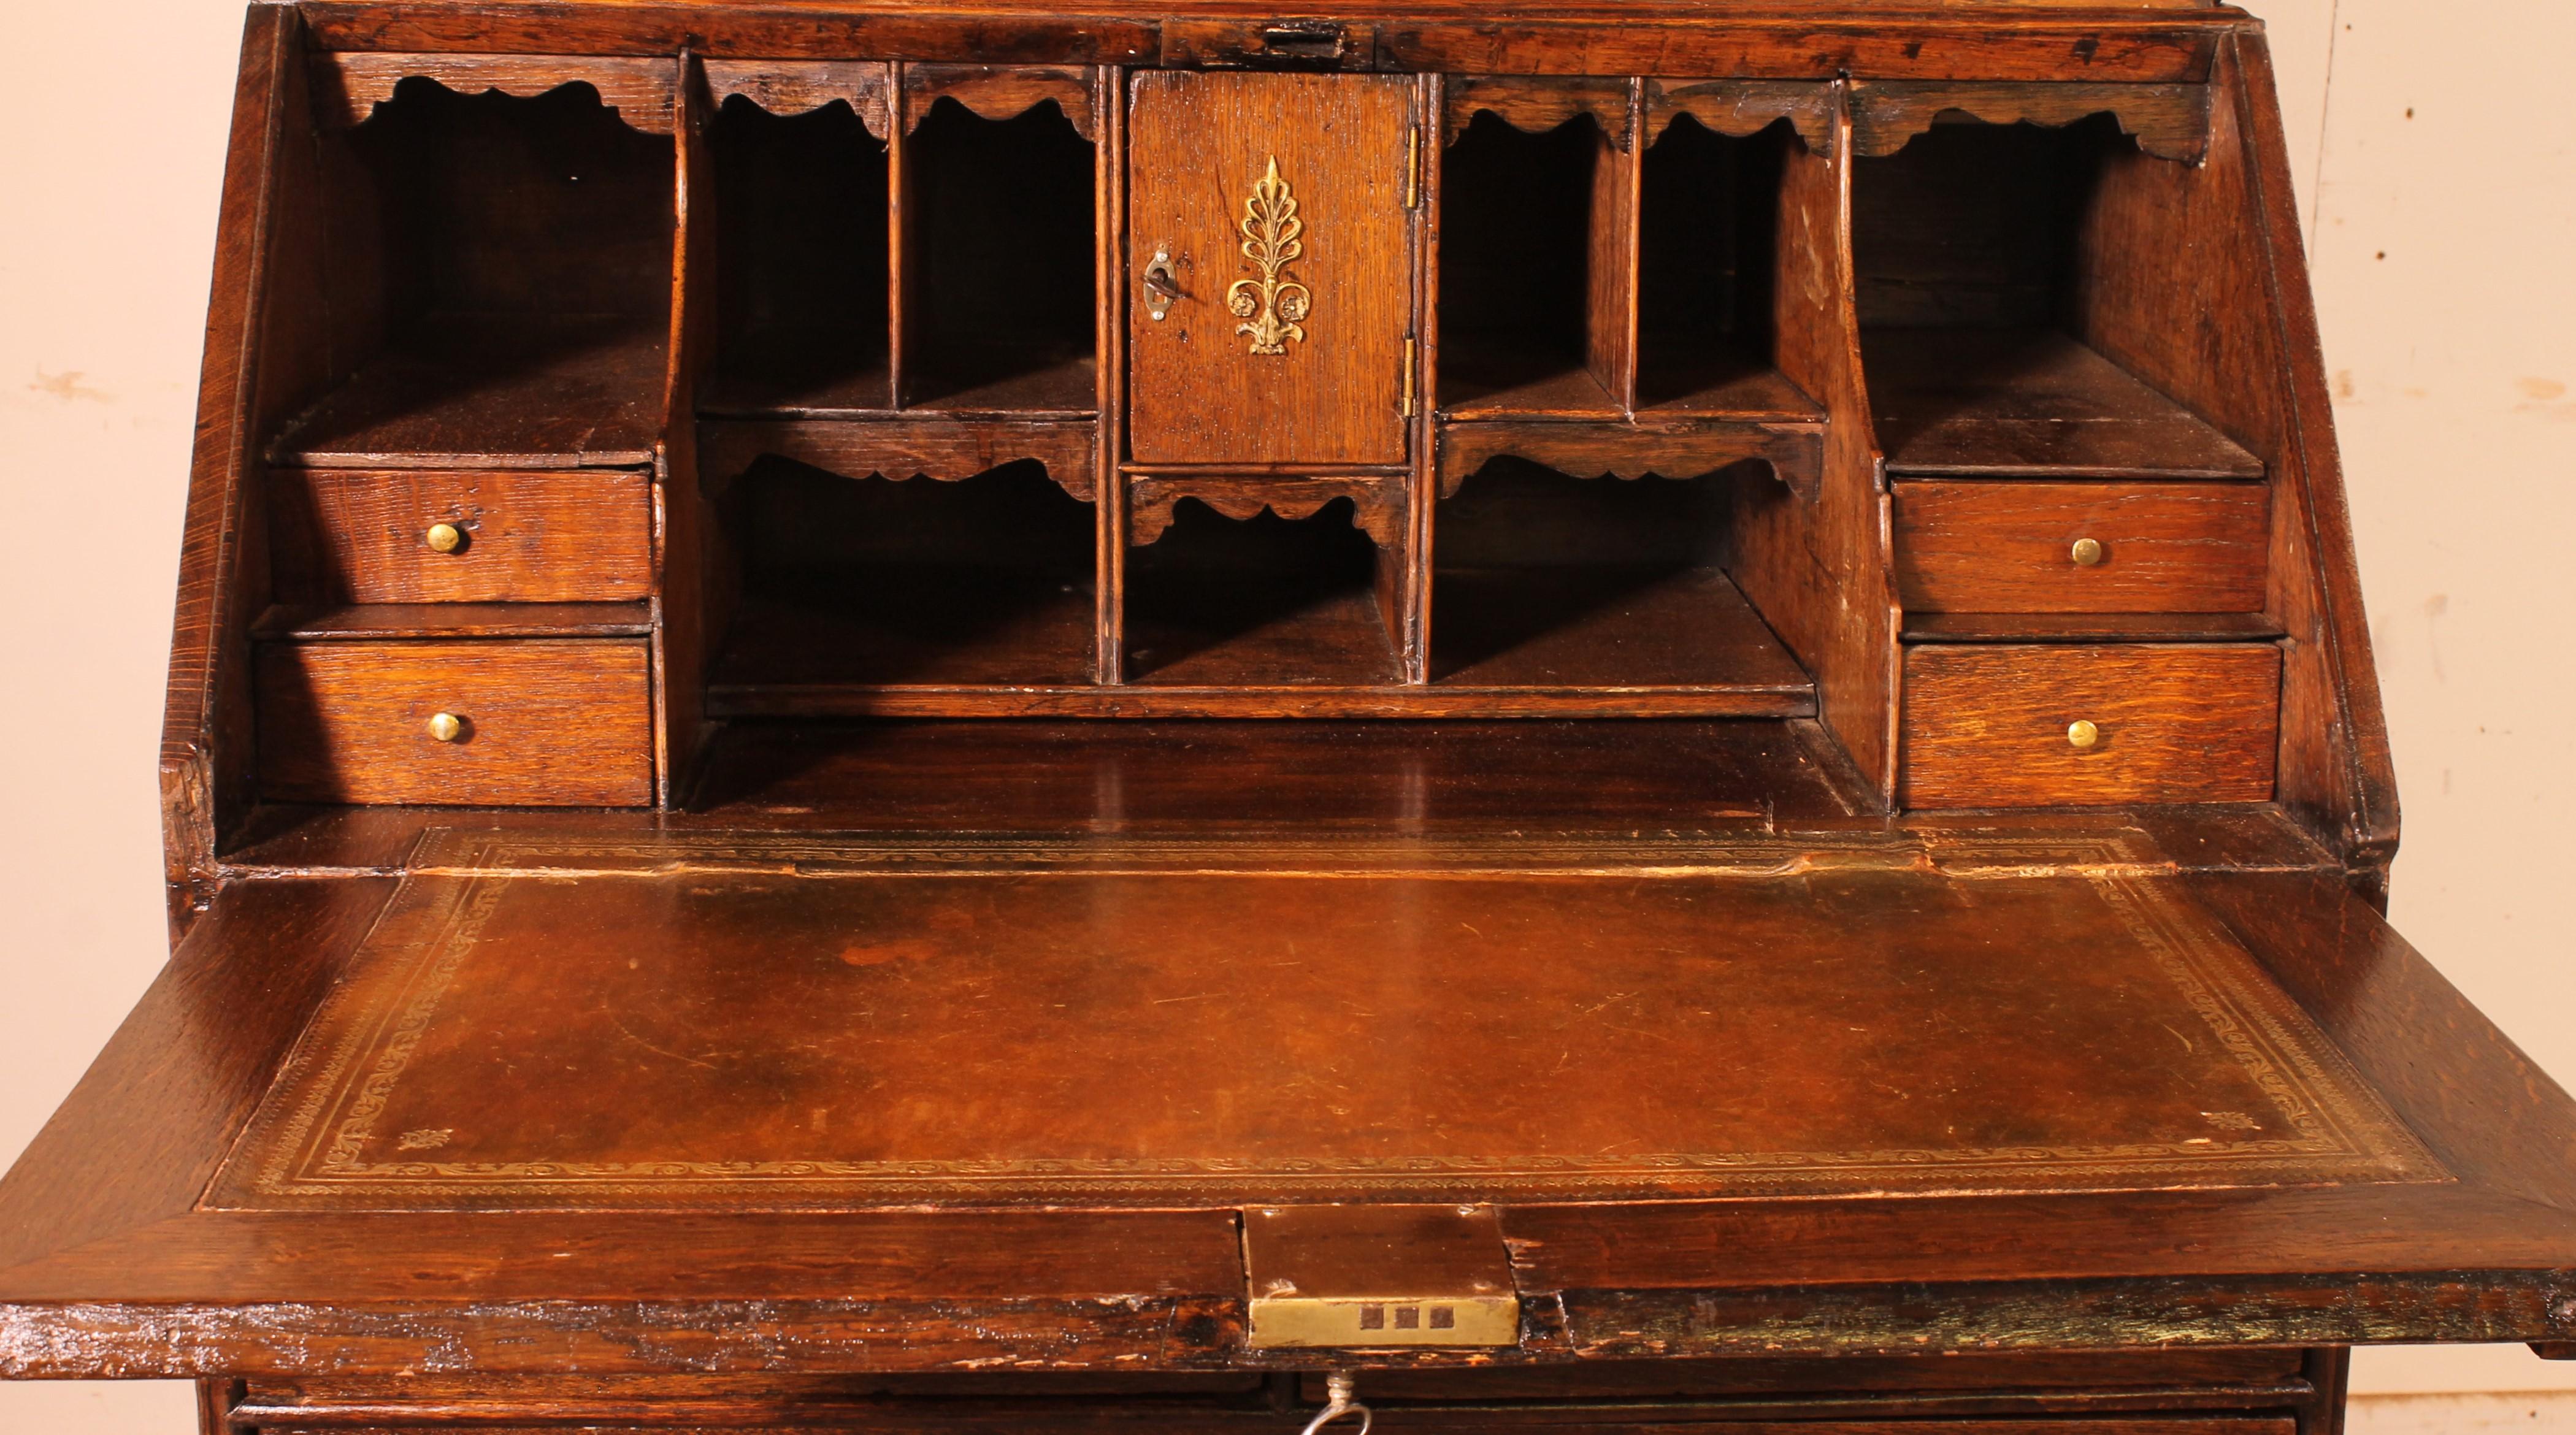 Glazed secretary in oak from the first part of the 18th century of very good quality with double dome
Double dome secretaries are the rarest and most sought-after

Very beautiful secretary composed of 4 drawers as well as a theater in the lower part